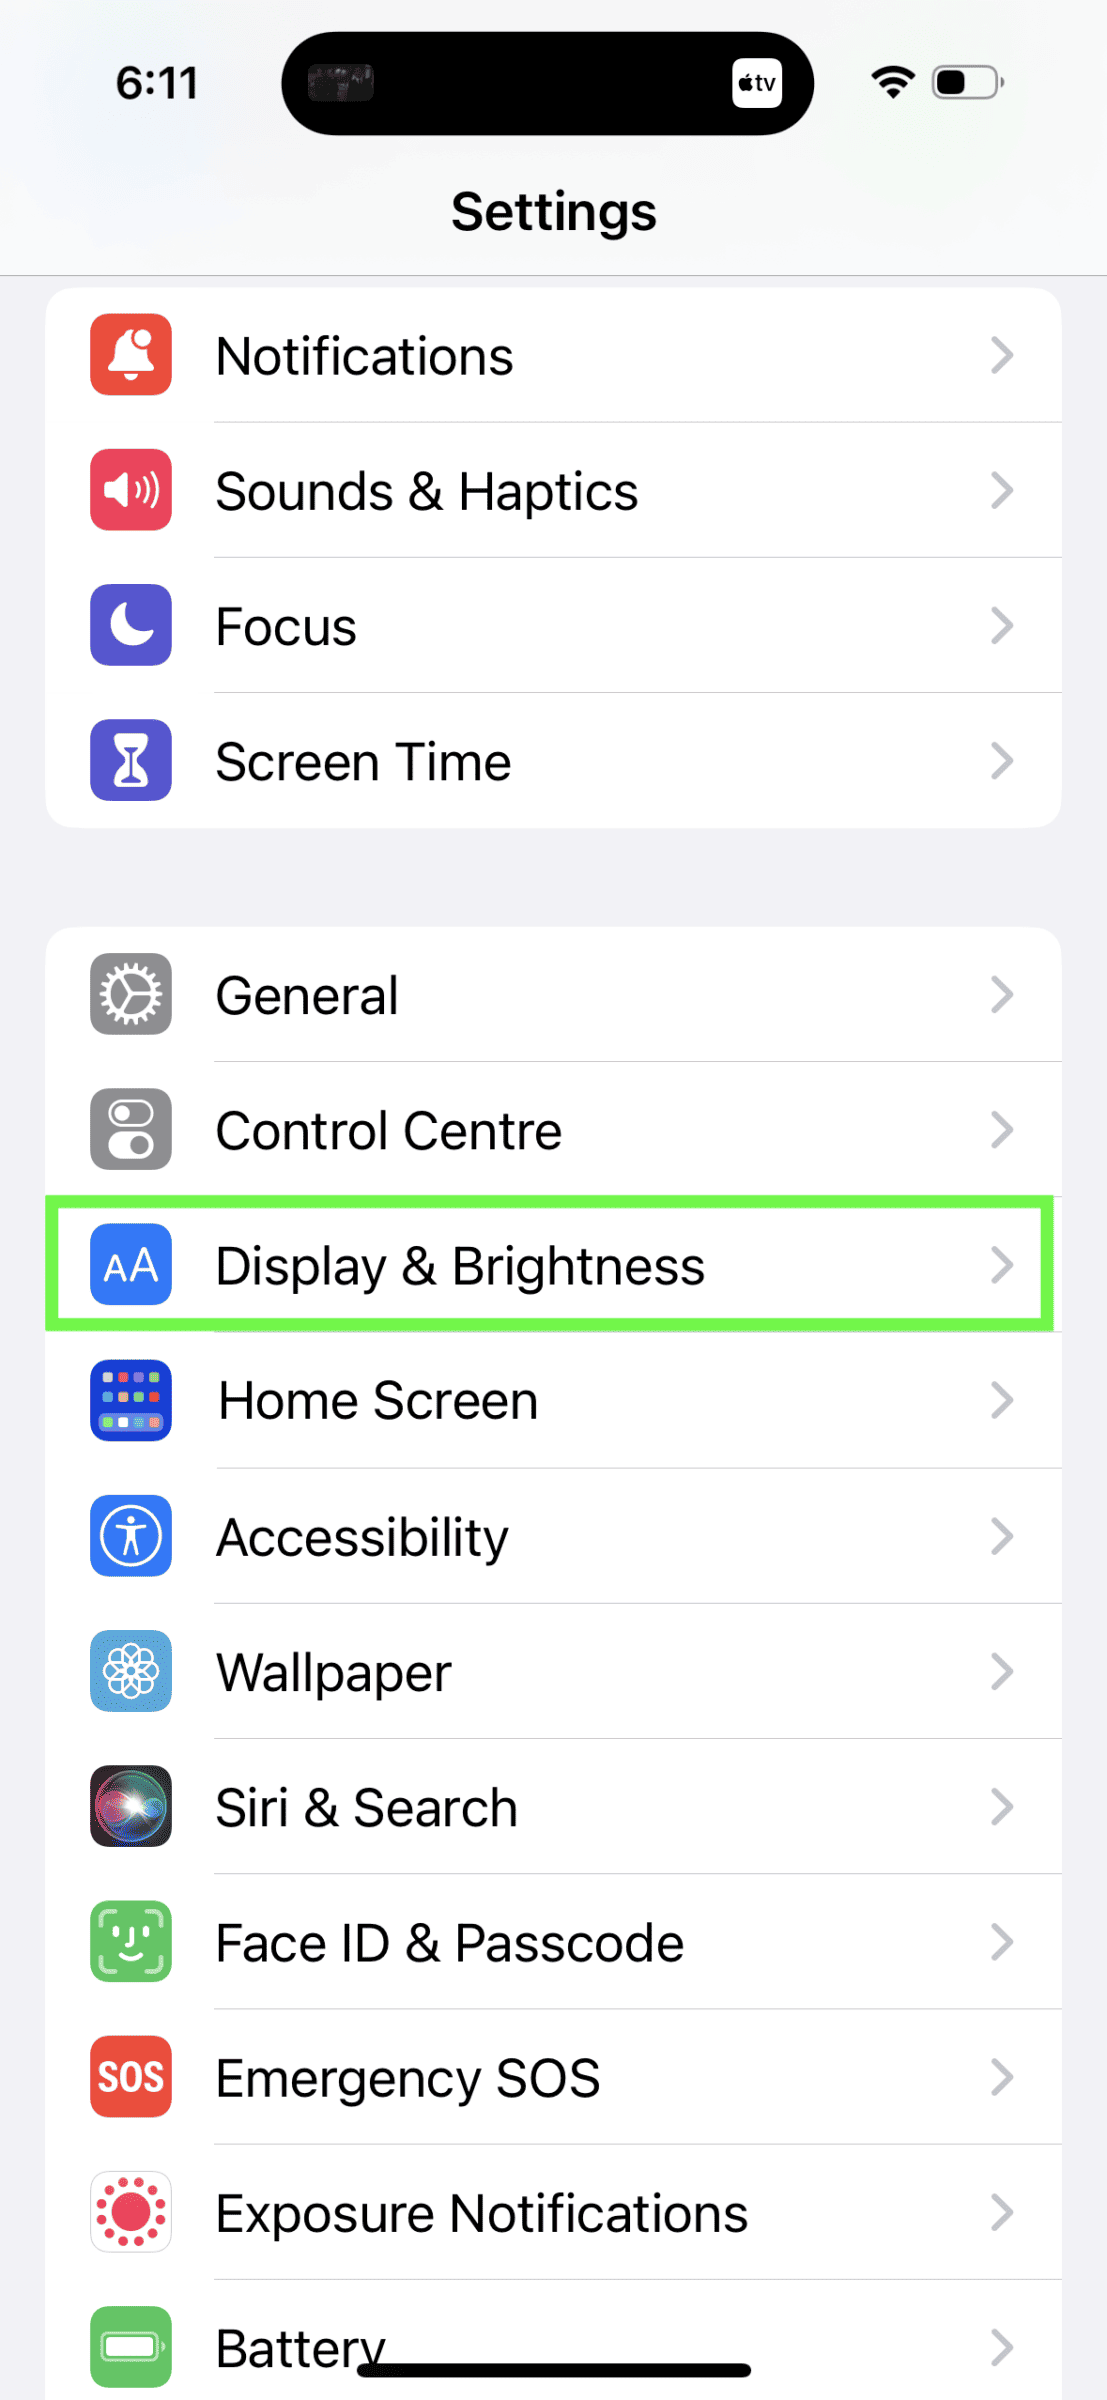 A screenshot of the display and brightness settings on an iPhone.